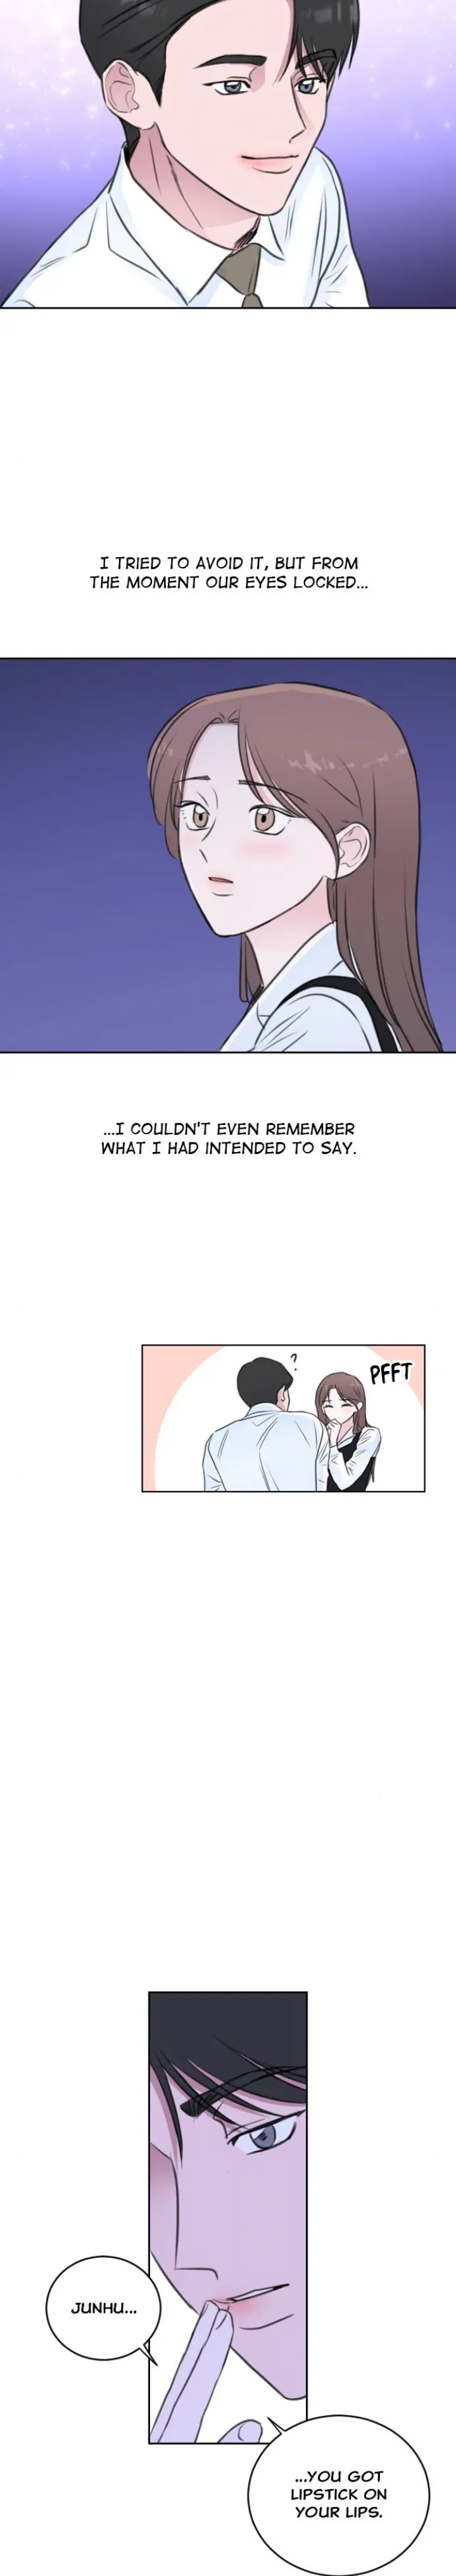 Office Marriage, After a Breakup chapter 32